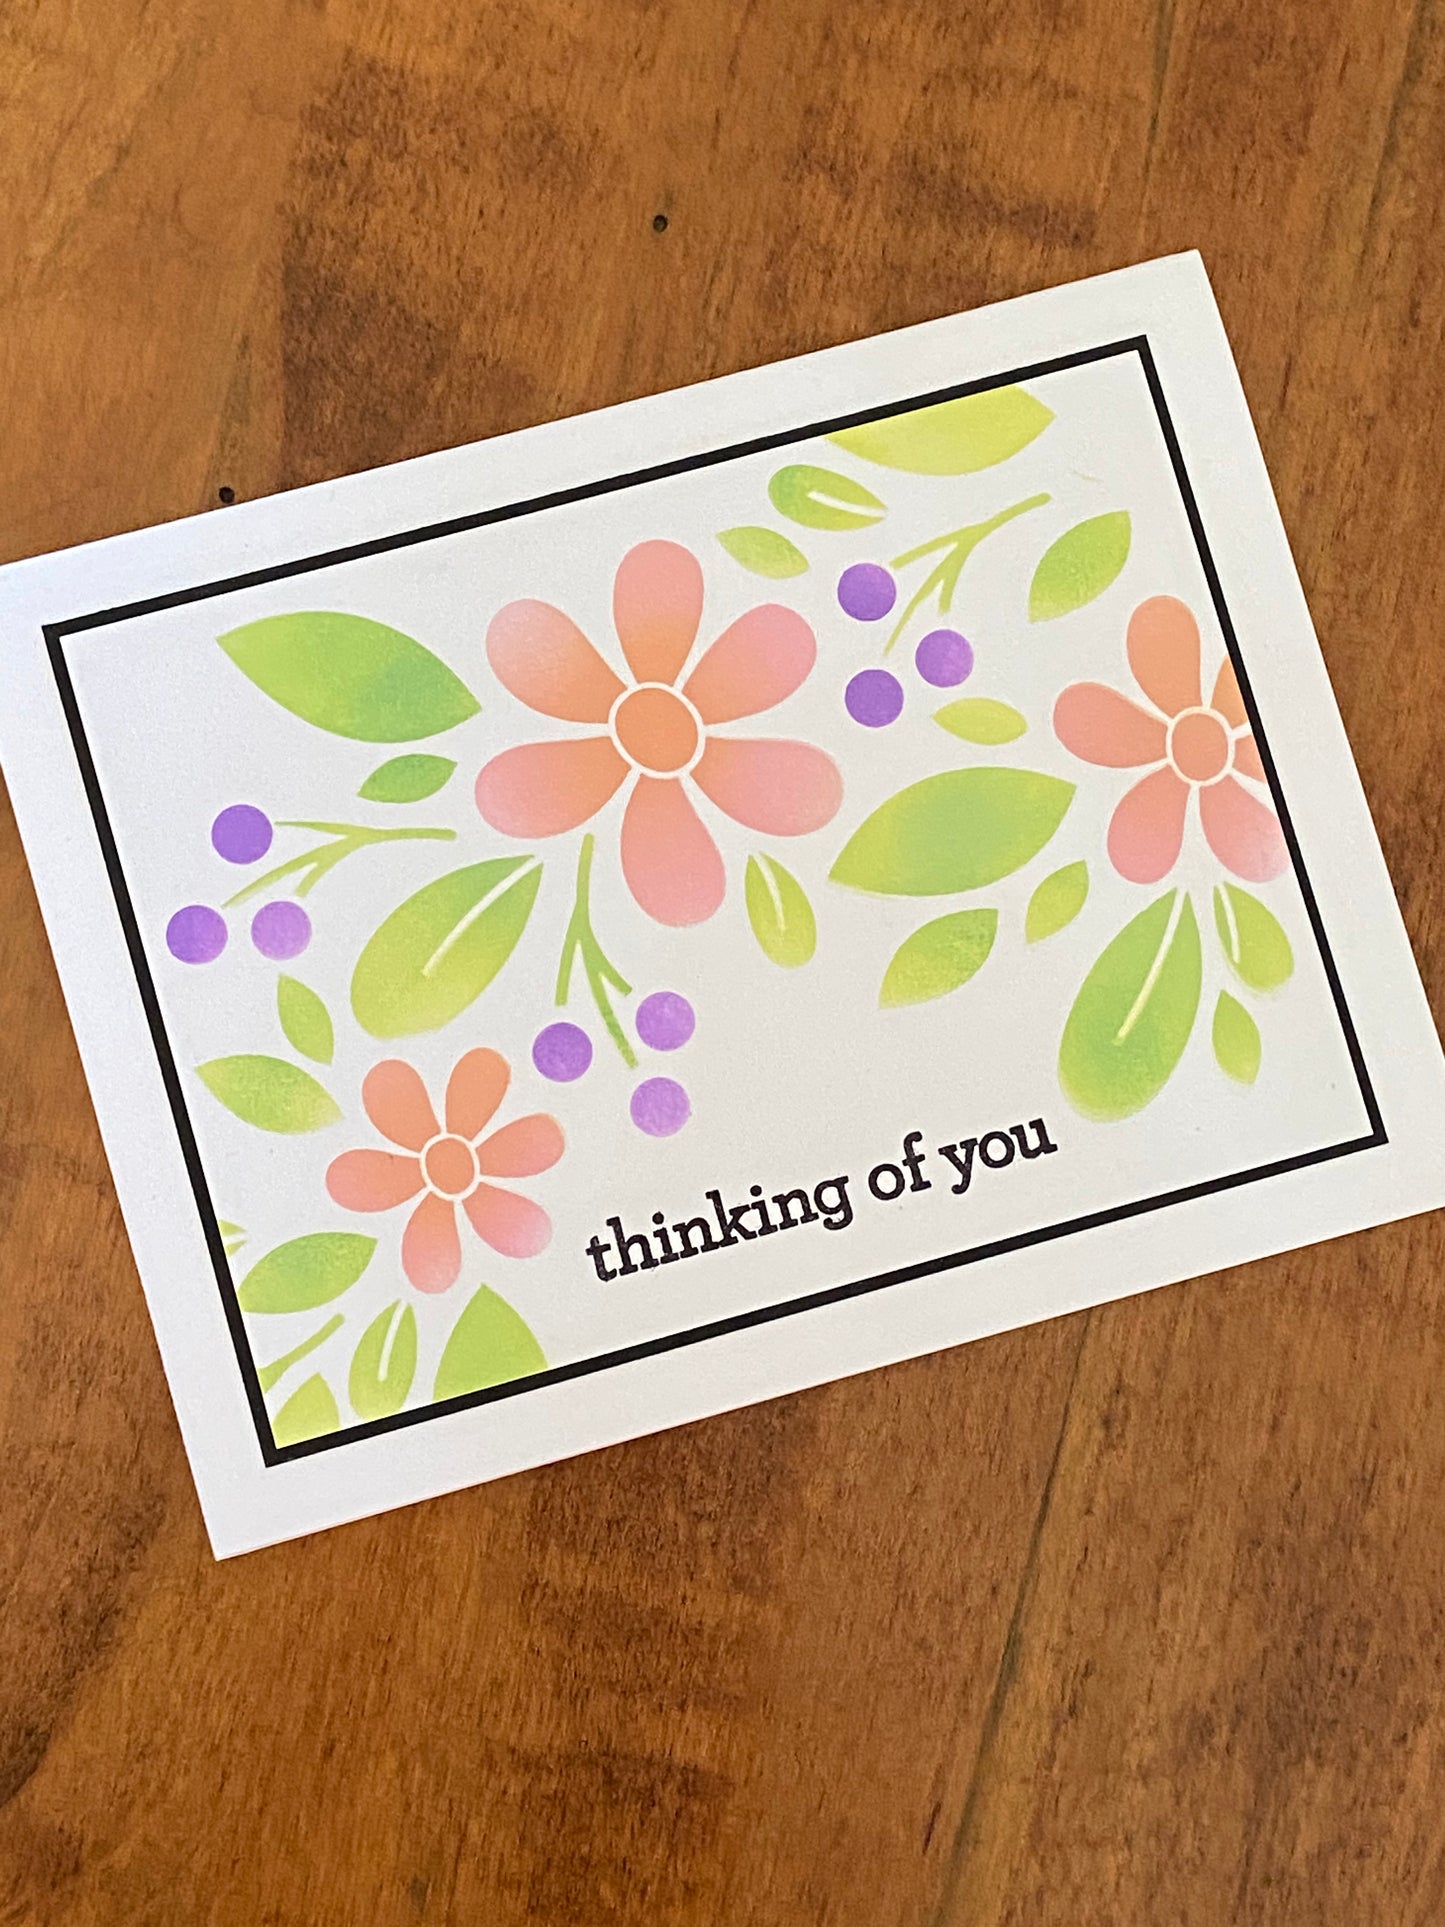 A coral daisy like flower, with green foliage and purple berries are hand stencilled onto a white background.  A thin black matte surrounds the panel which is mounted onto a white notecard.   A simple stamped "thinking of you" sentiment is stamped in black below the flowers and leaves.